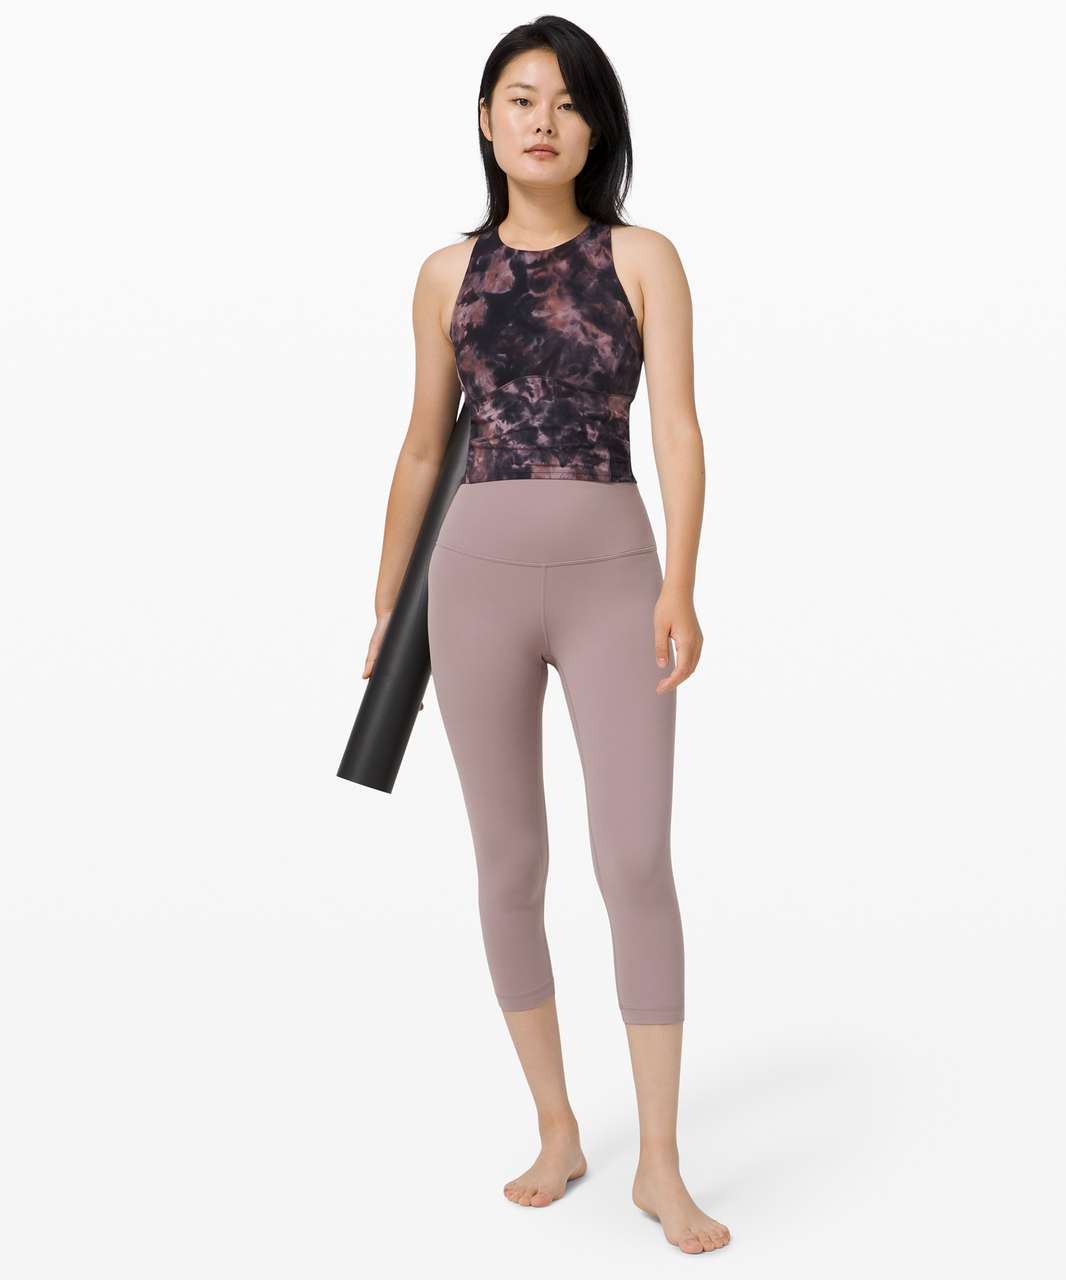 Managed to get the align jogger in violet verbena when it was added to WMTM  at 2am, one perk of not sleeping : r/lululemon